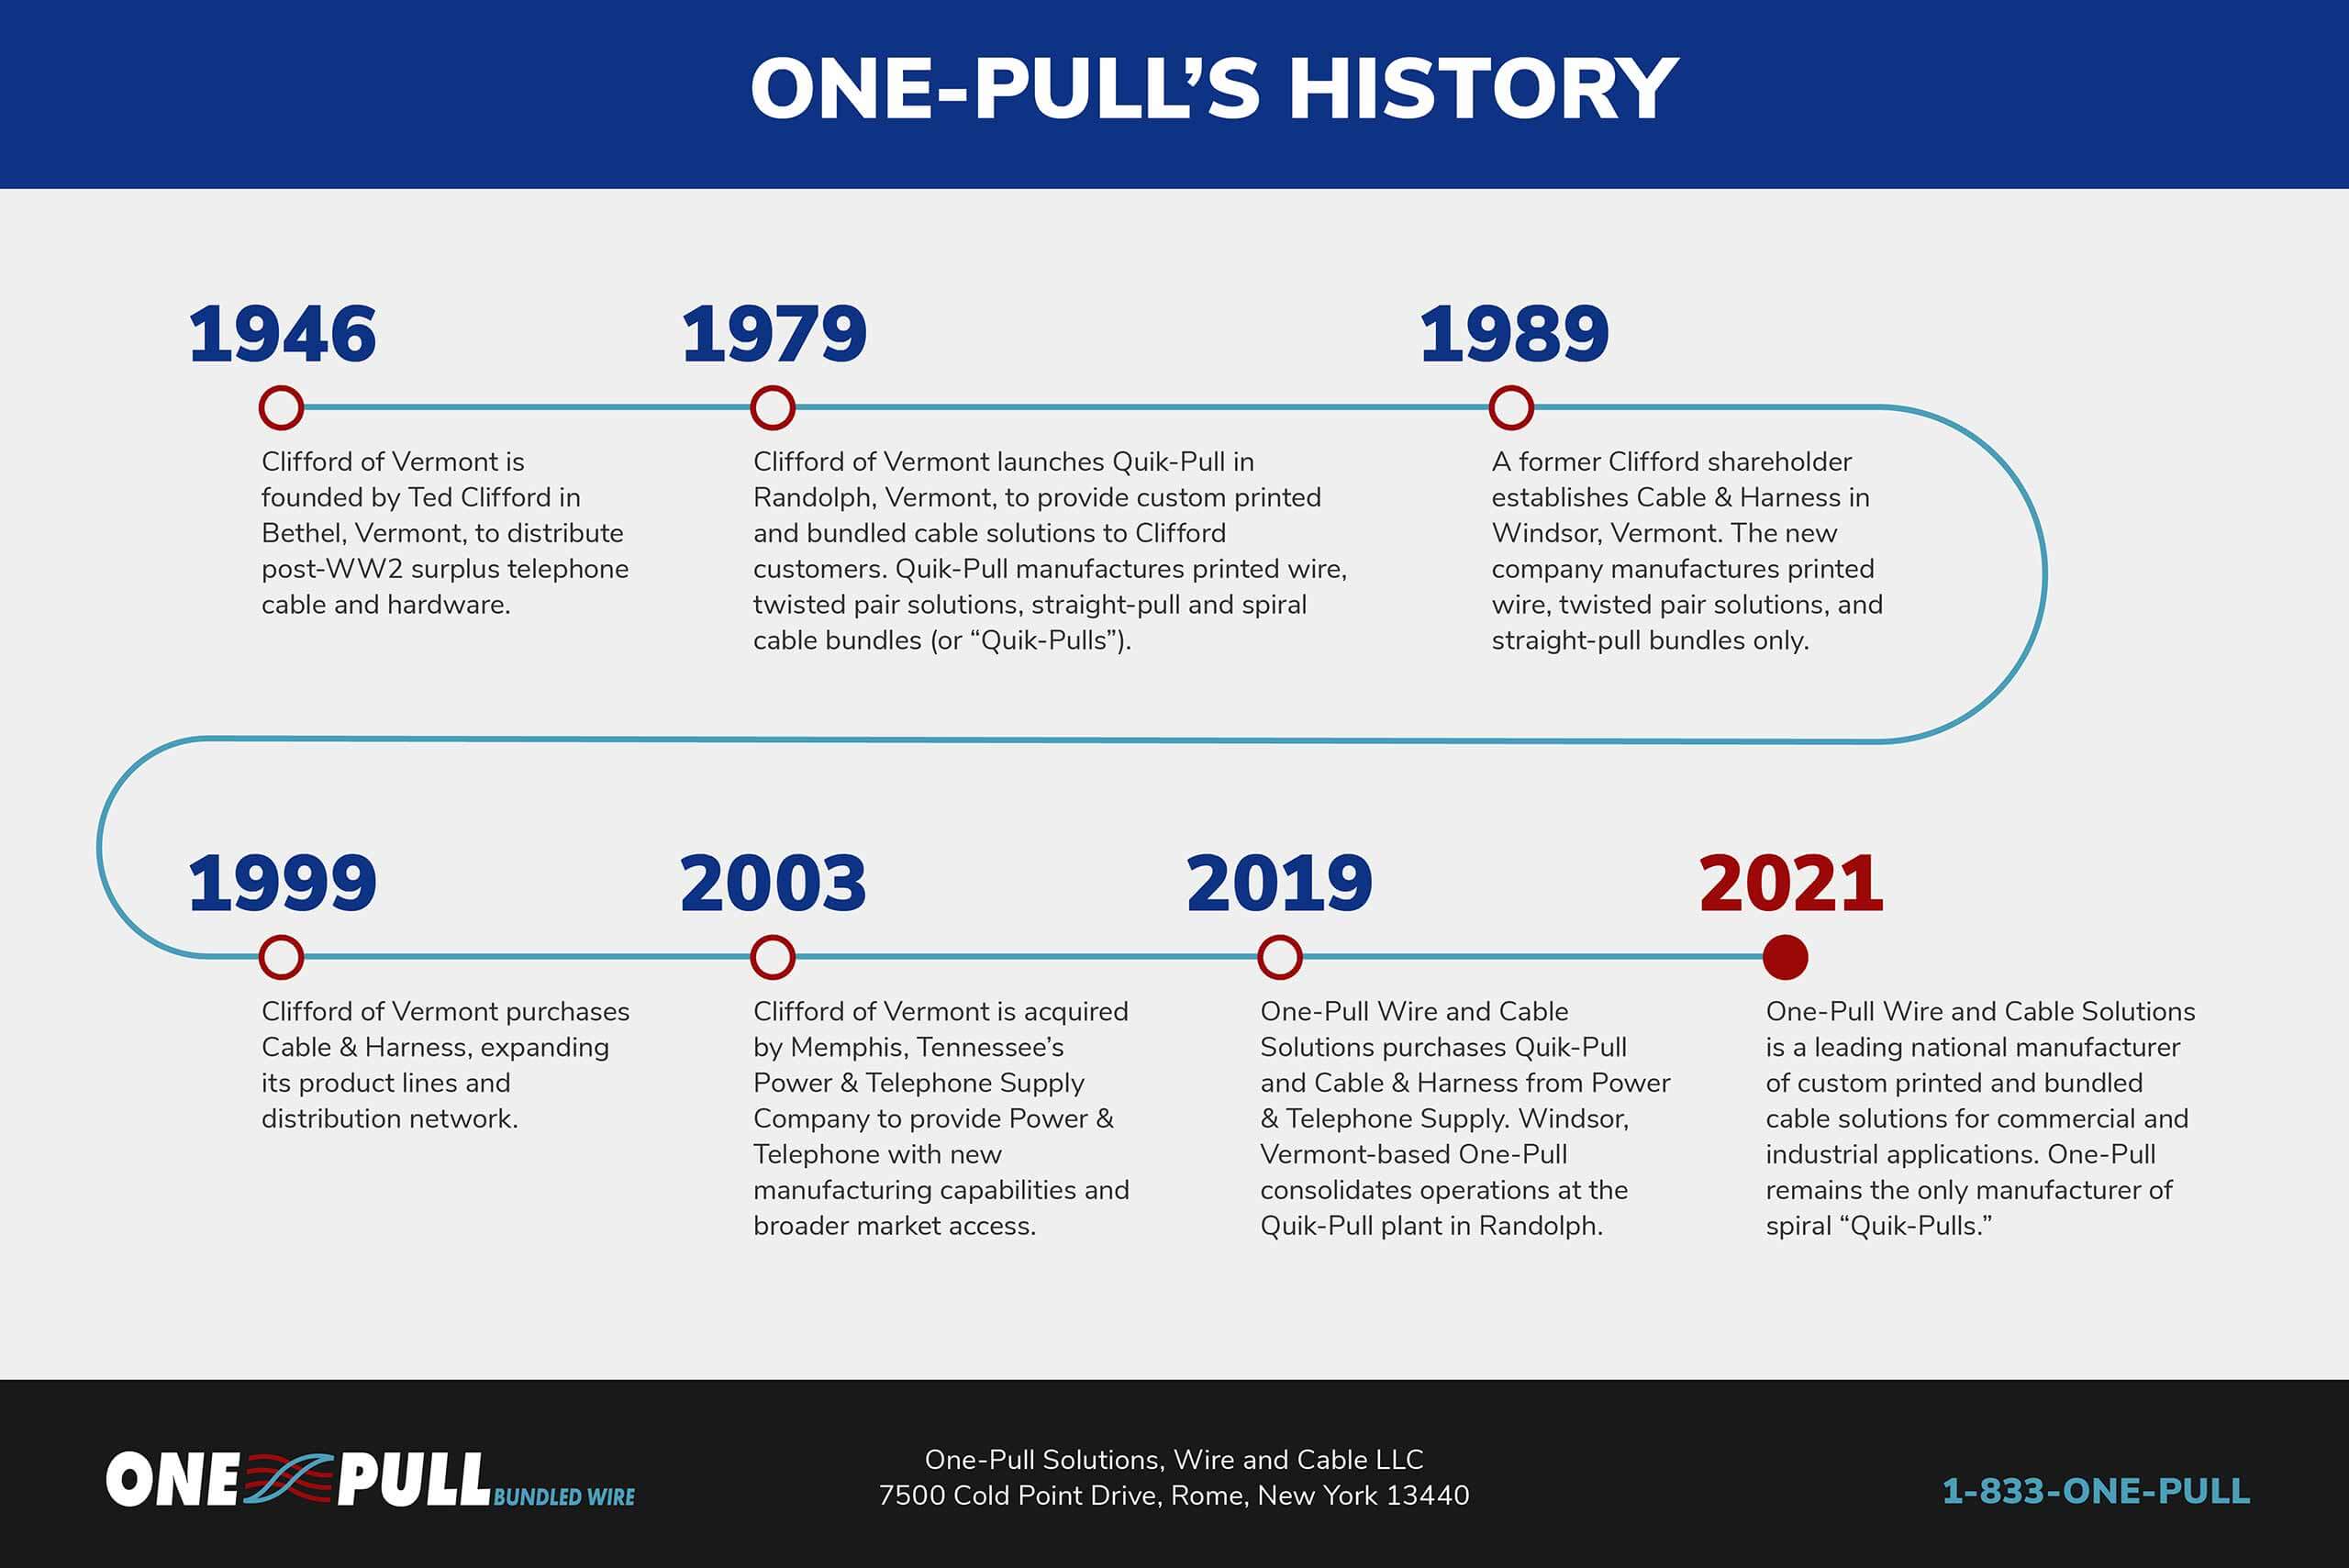 One-Pull’s History: A Legacy of Innovation